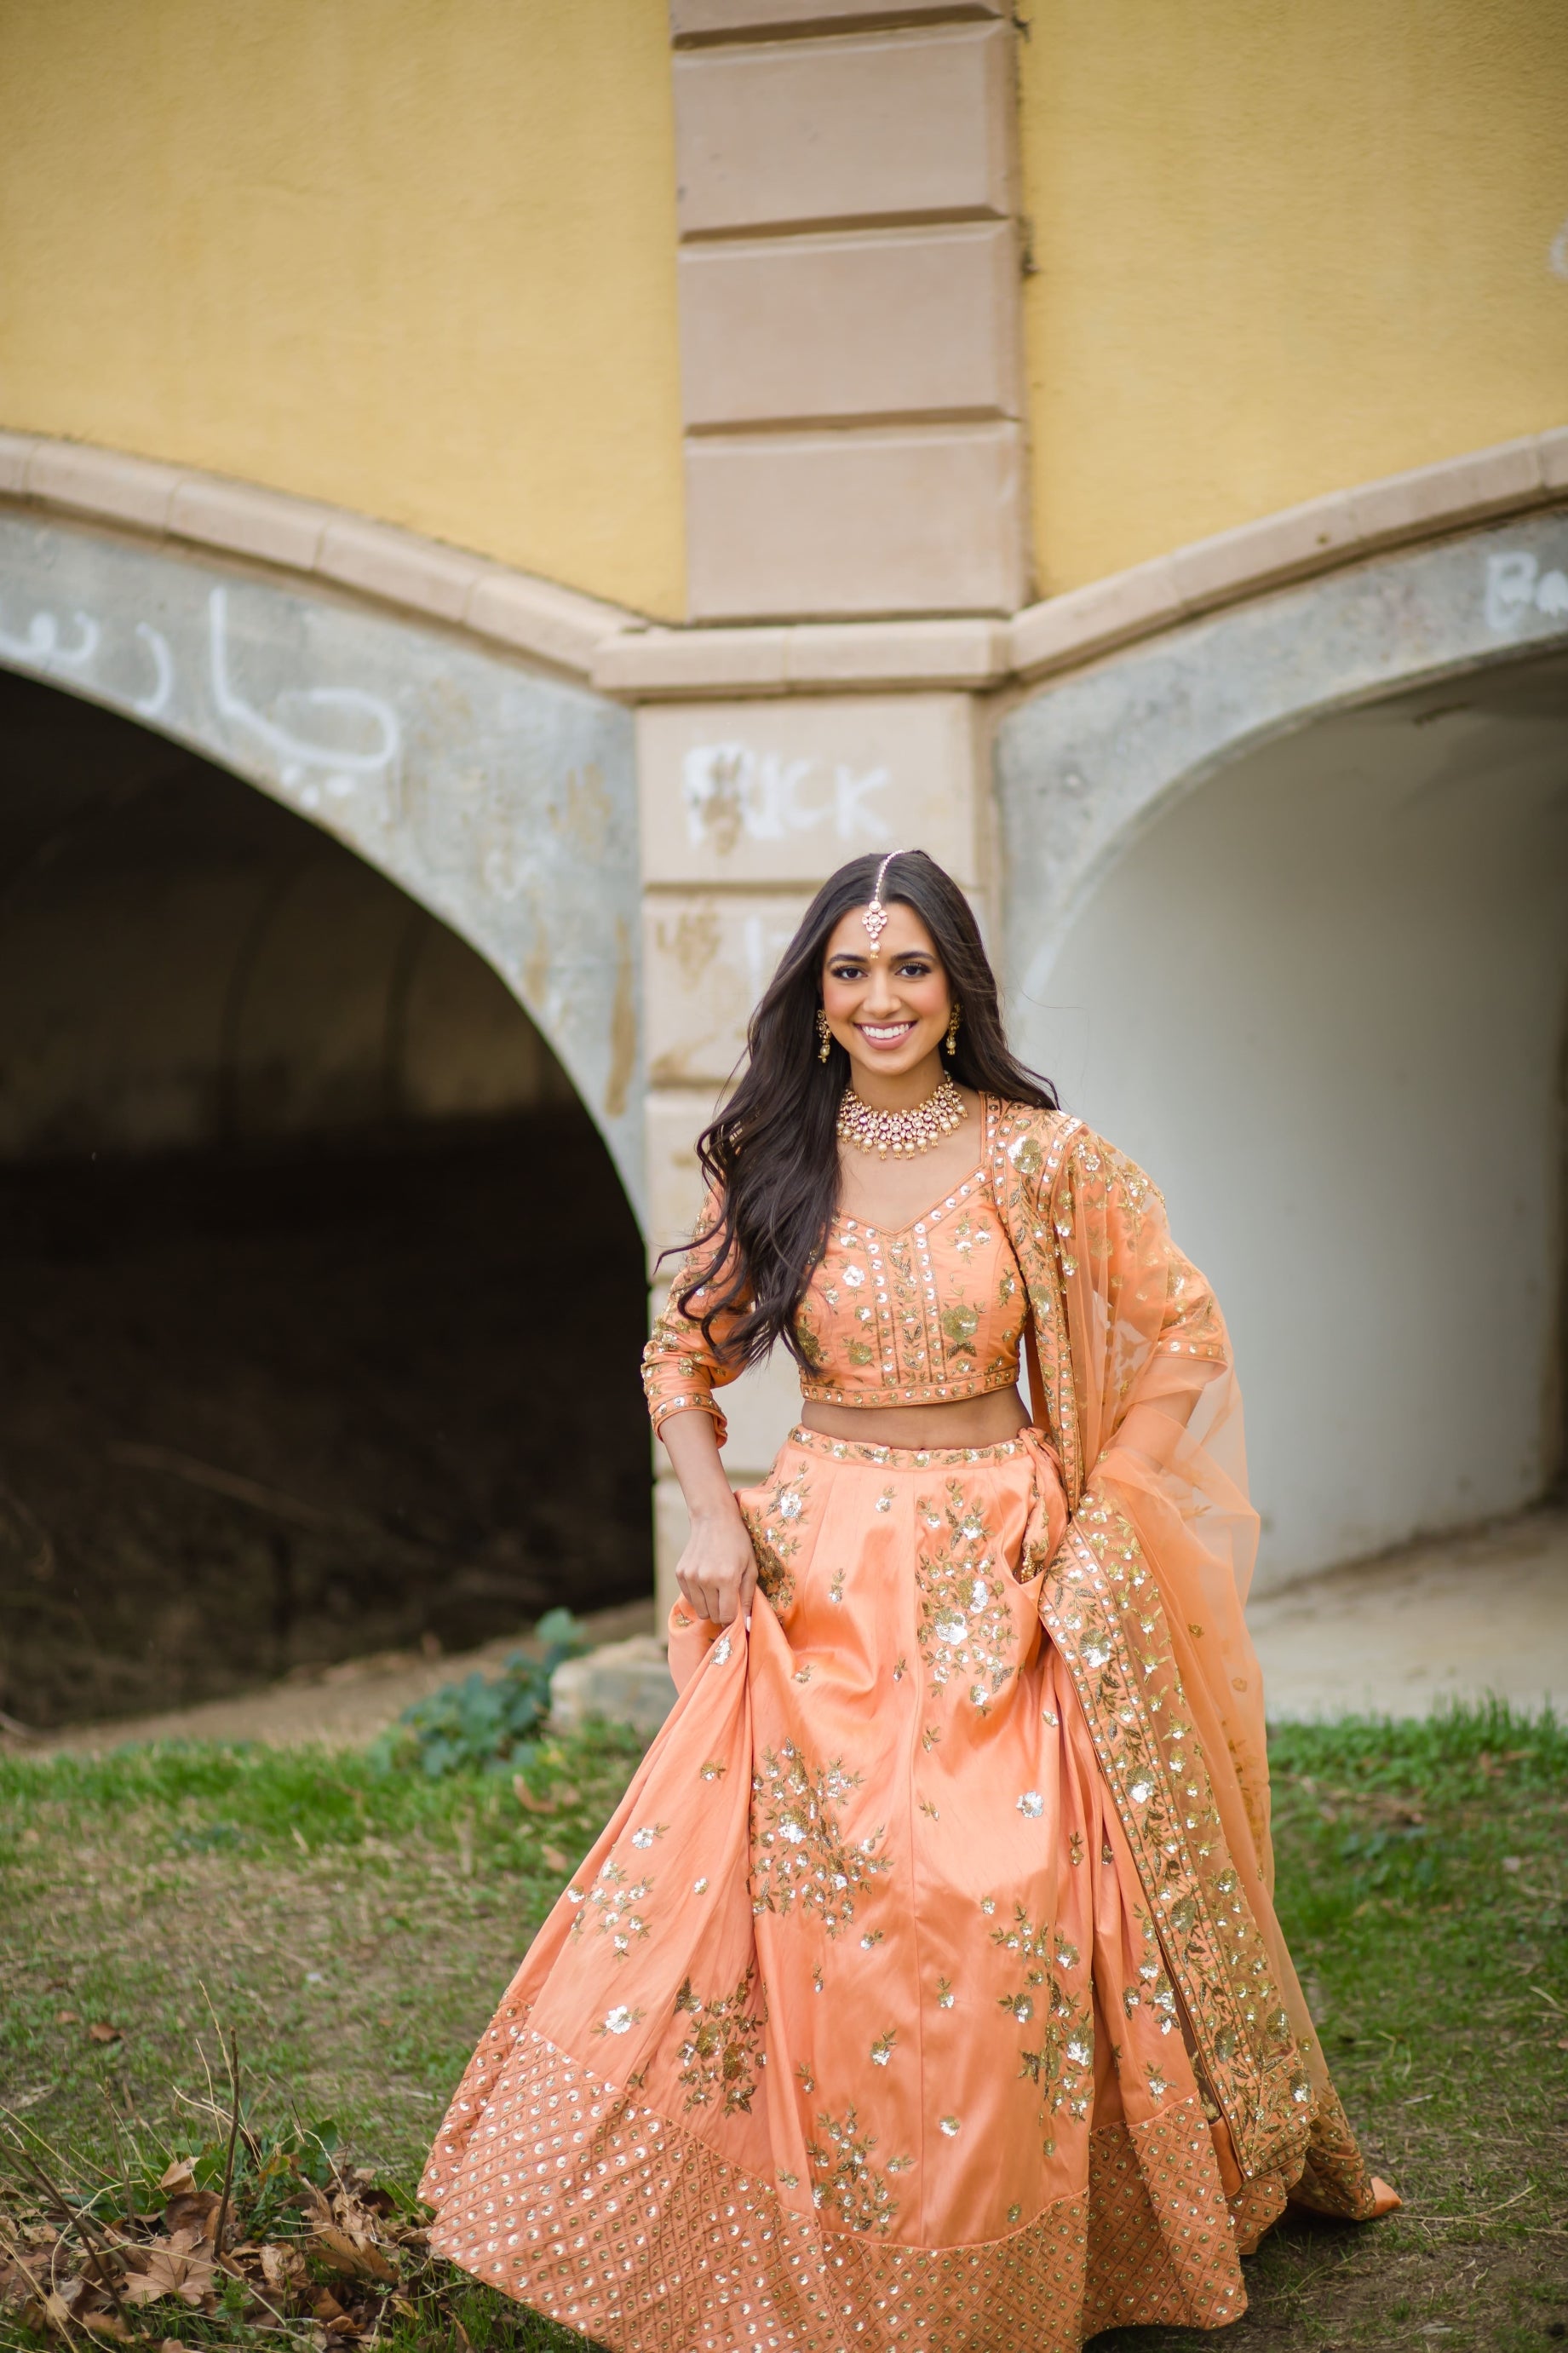 peach Indian Pakistani Heavily Embroidered Bridal Wedding Dress - trail gown  | eBay